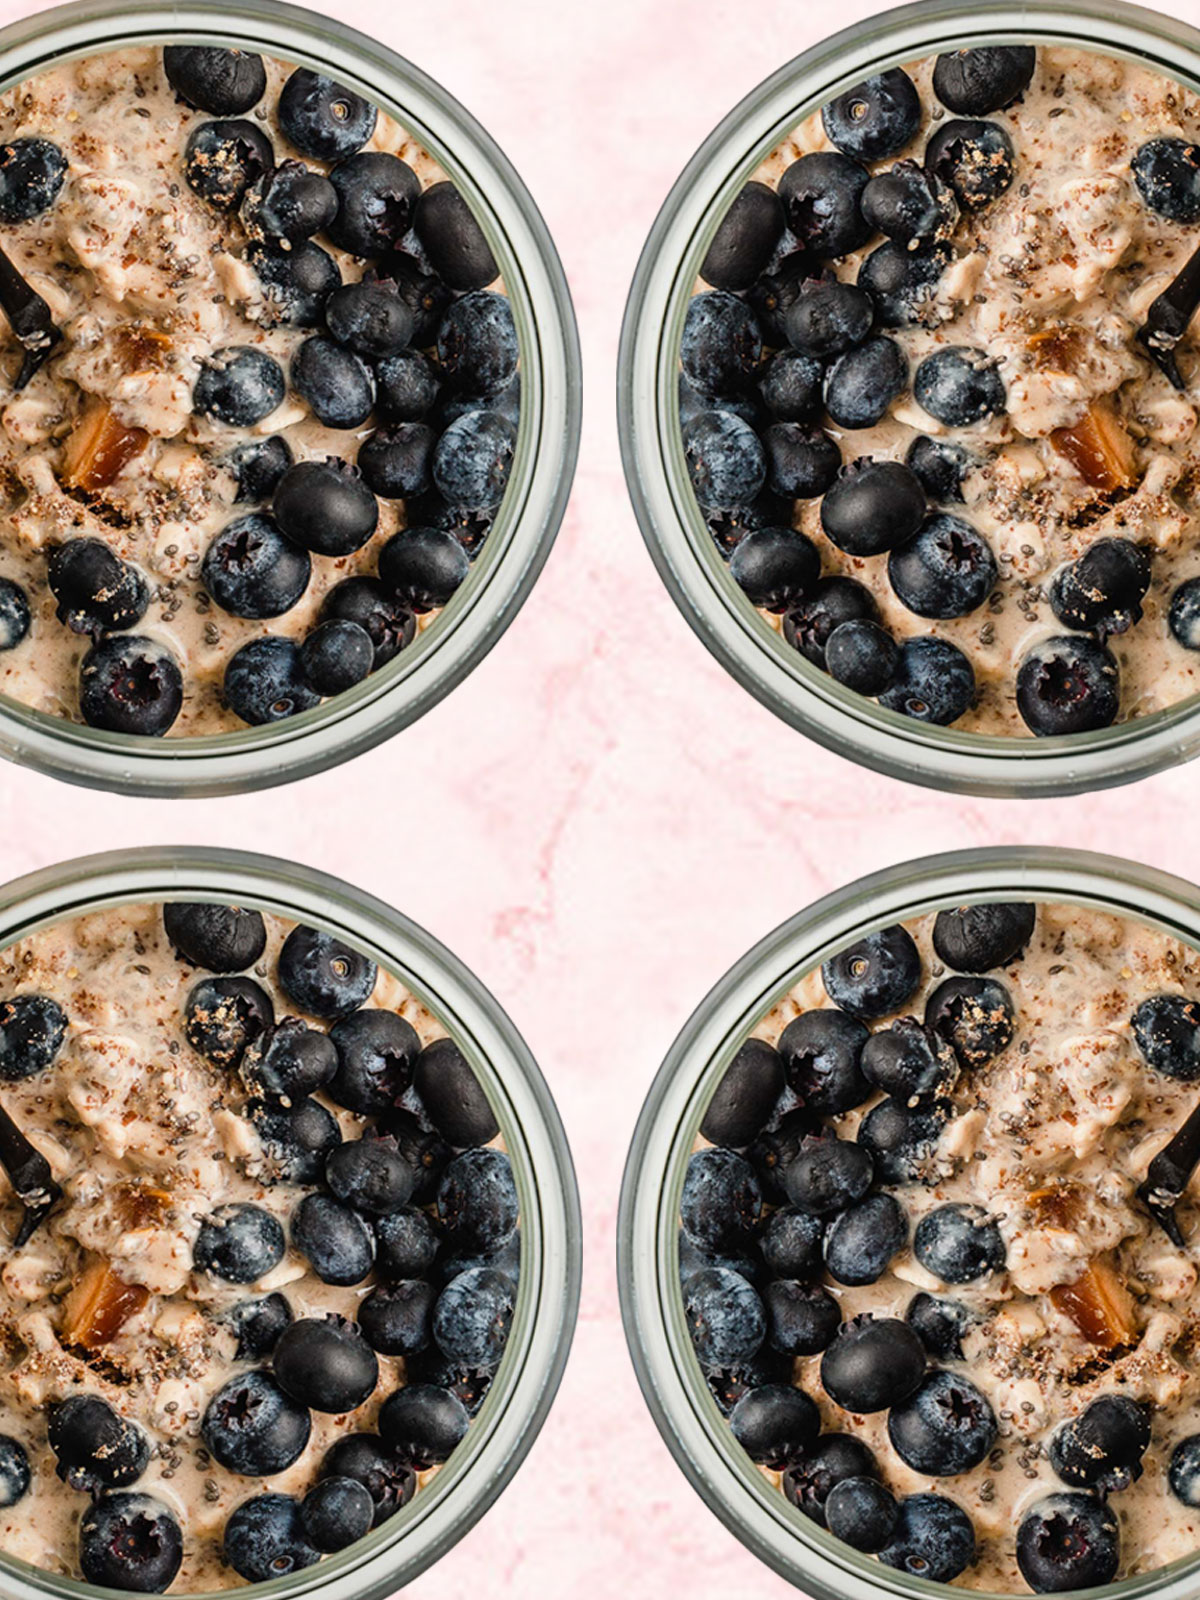 Four jars of blueberry overnight oats on a table.